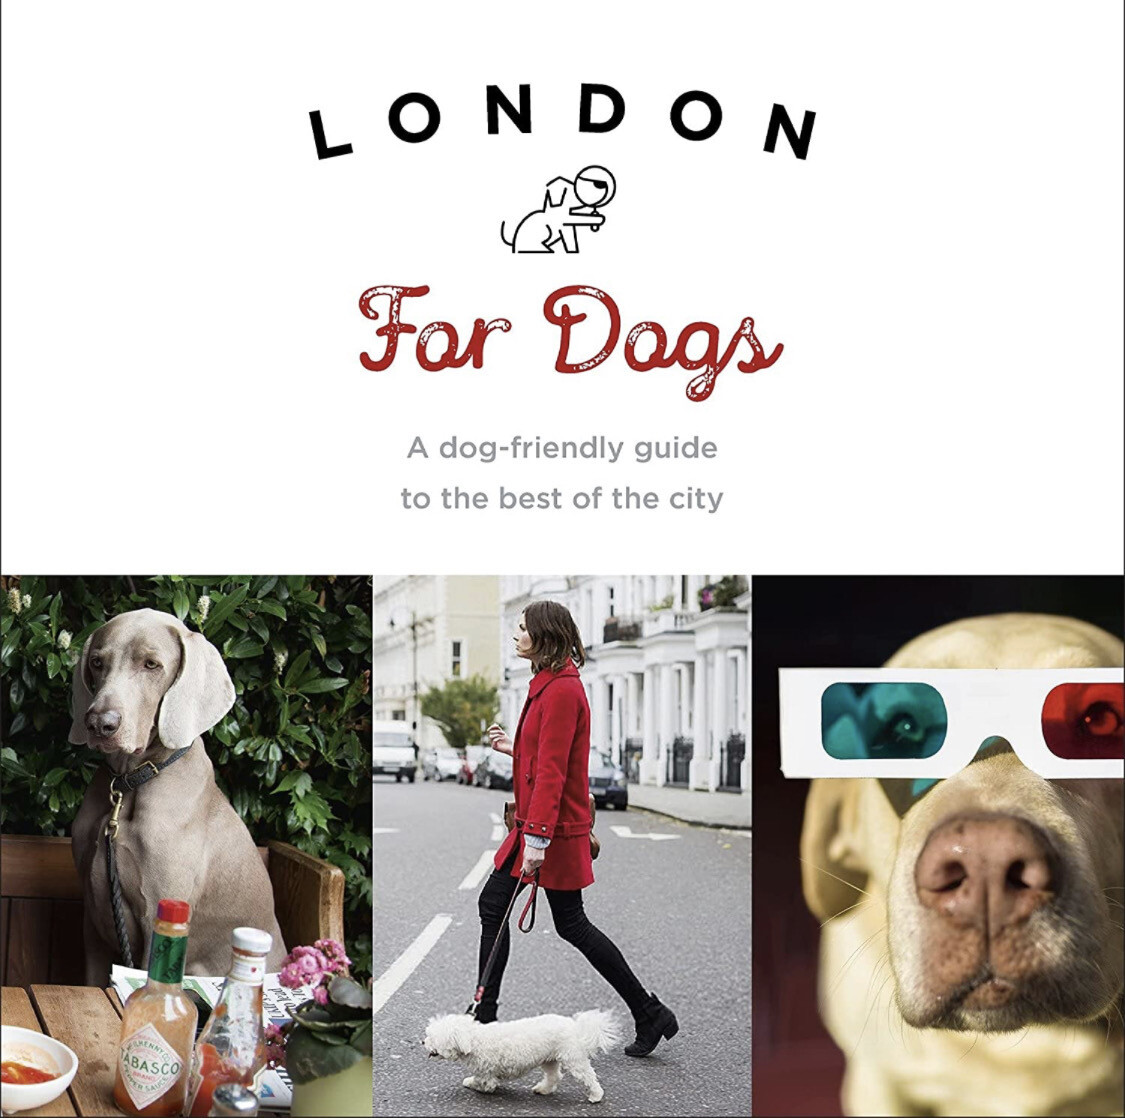 London for Dogs